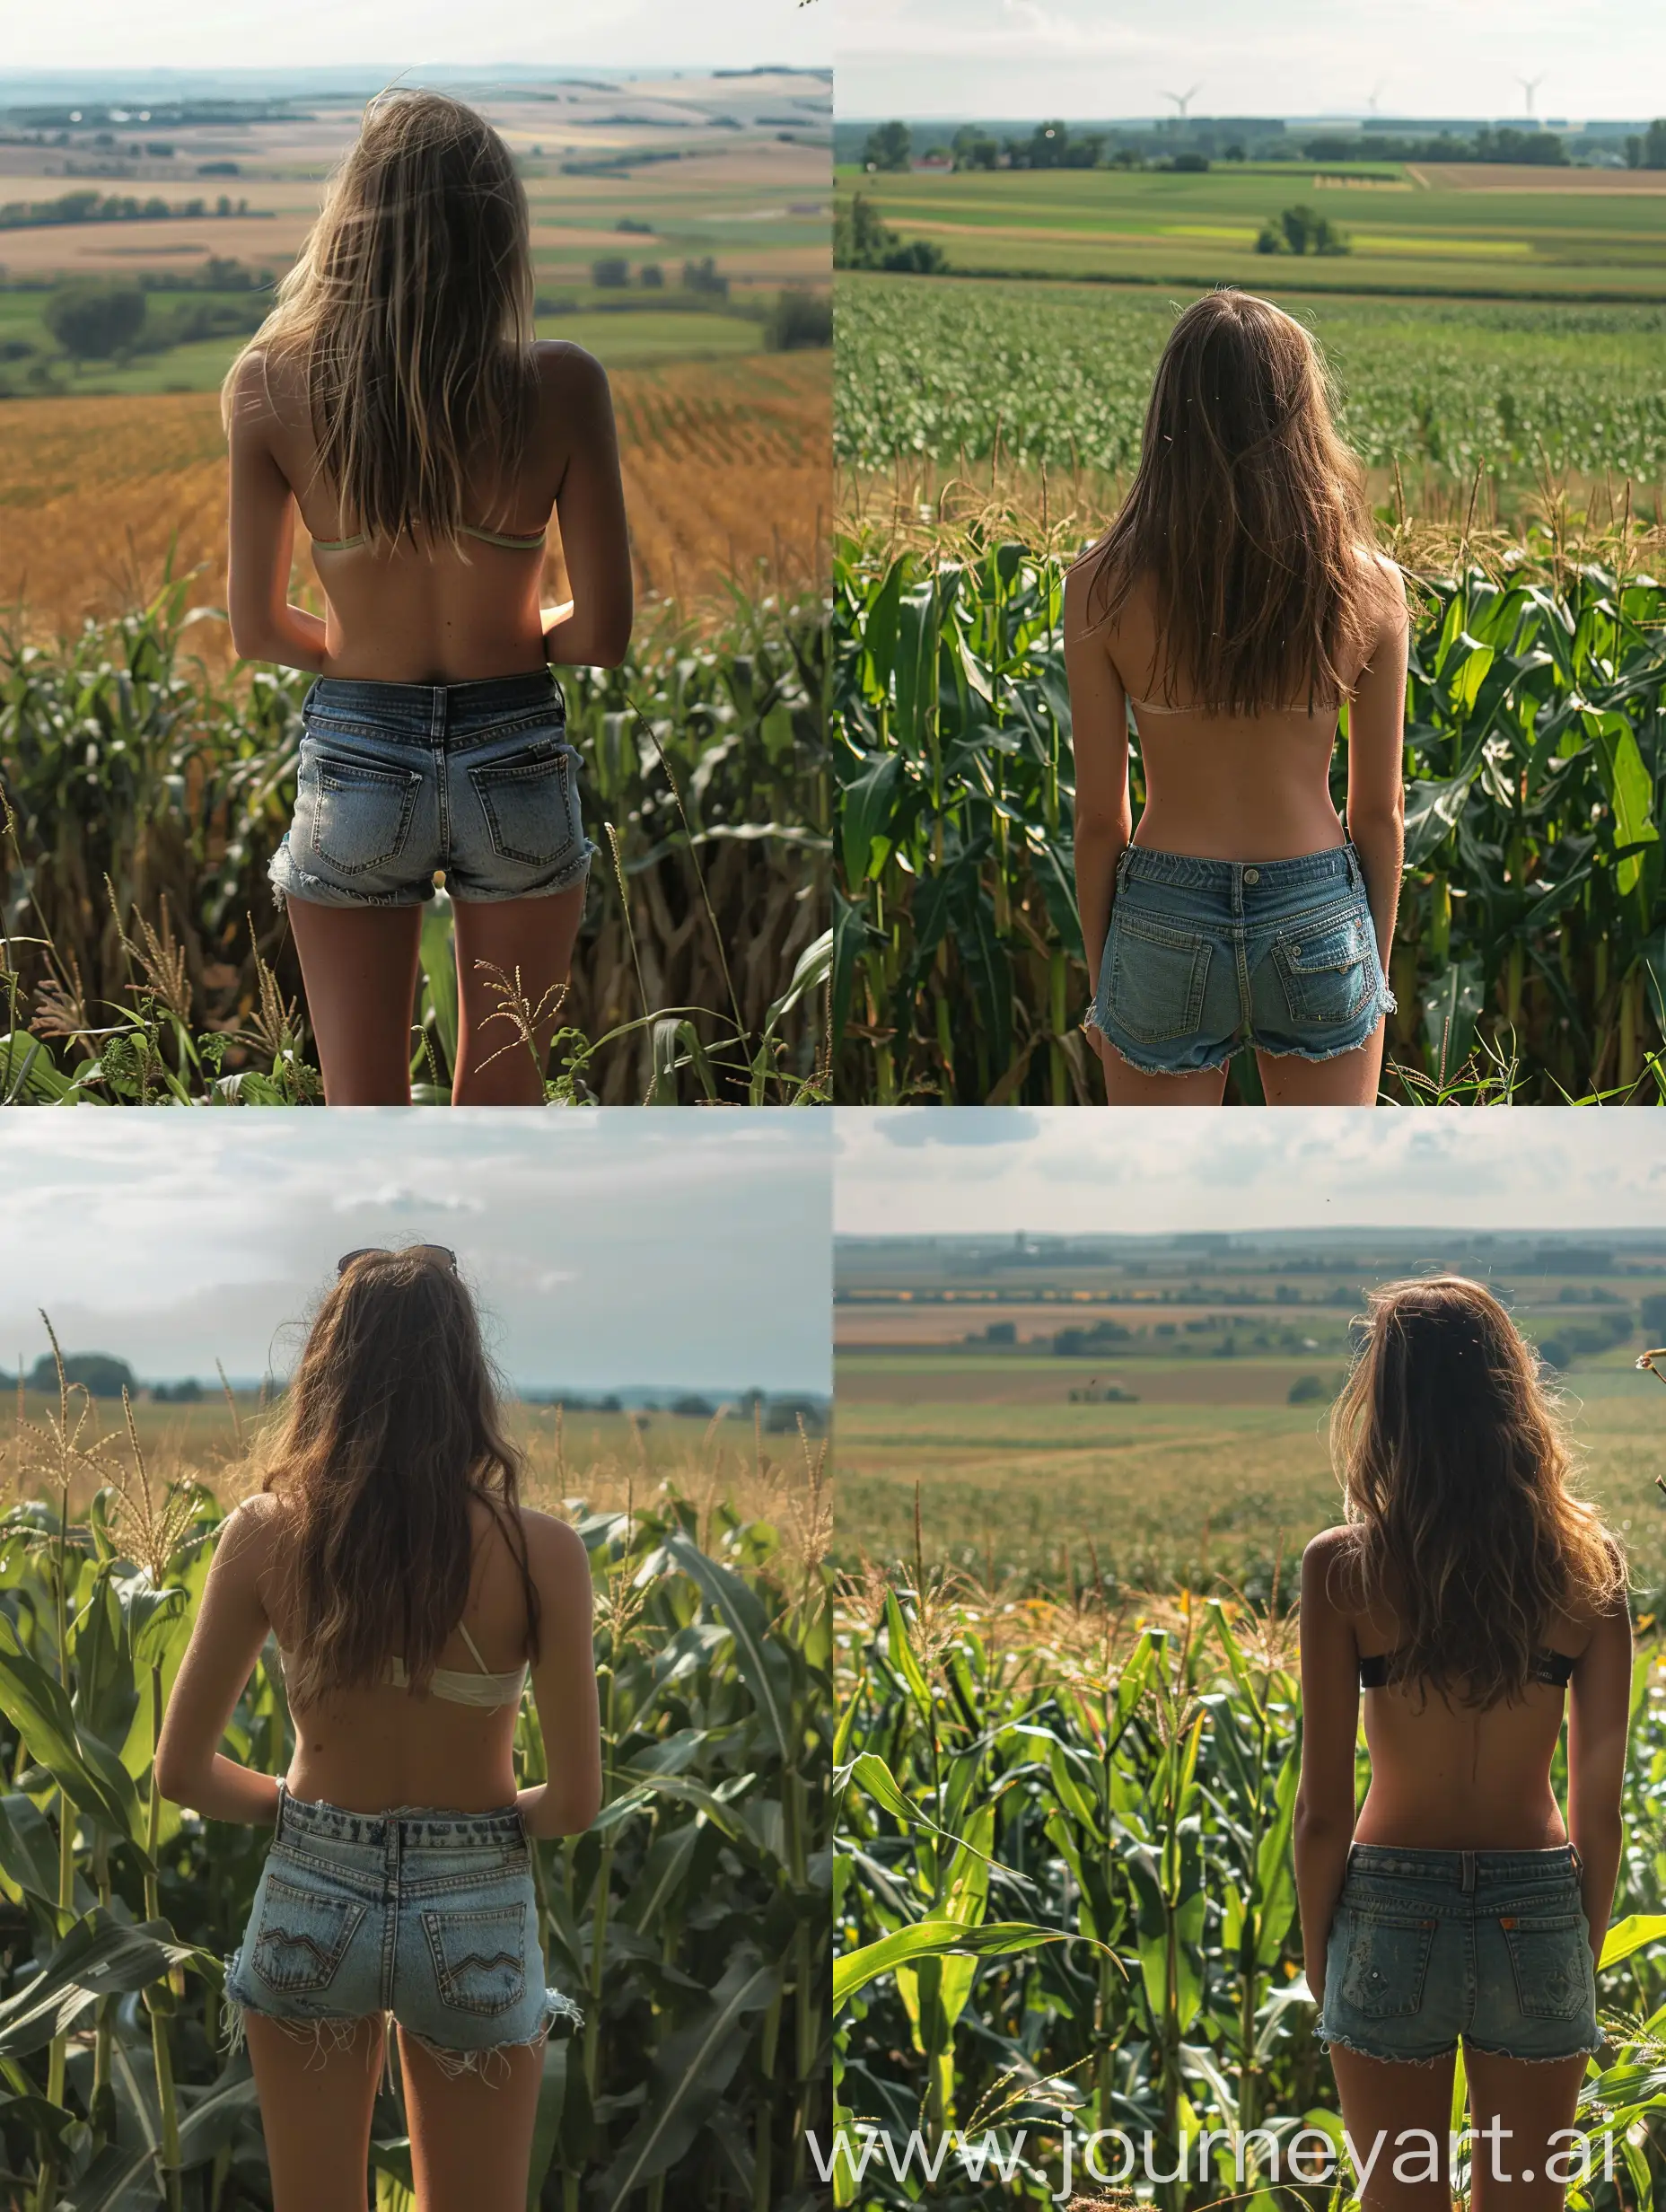 A girl, 22 years old, wearing jeans shorts, looking at wast cornfield, photo from behind